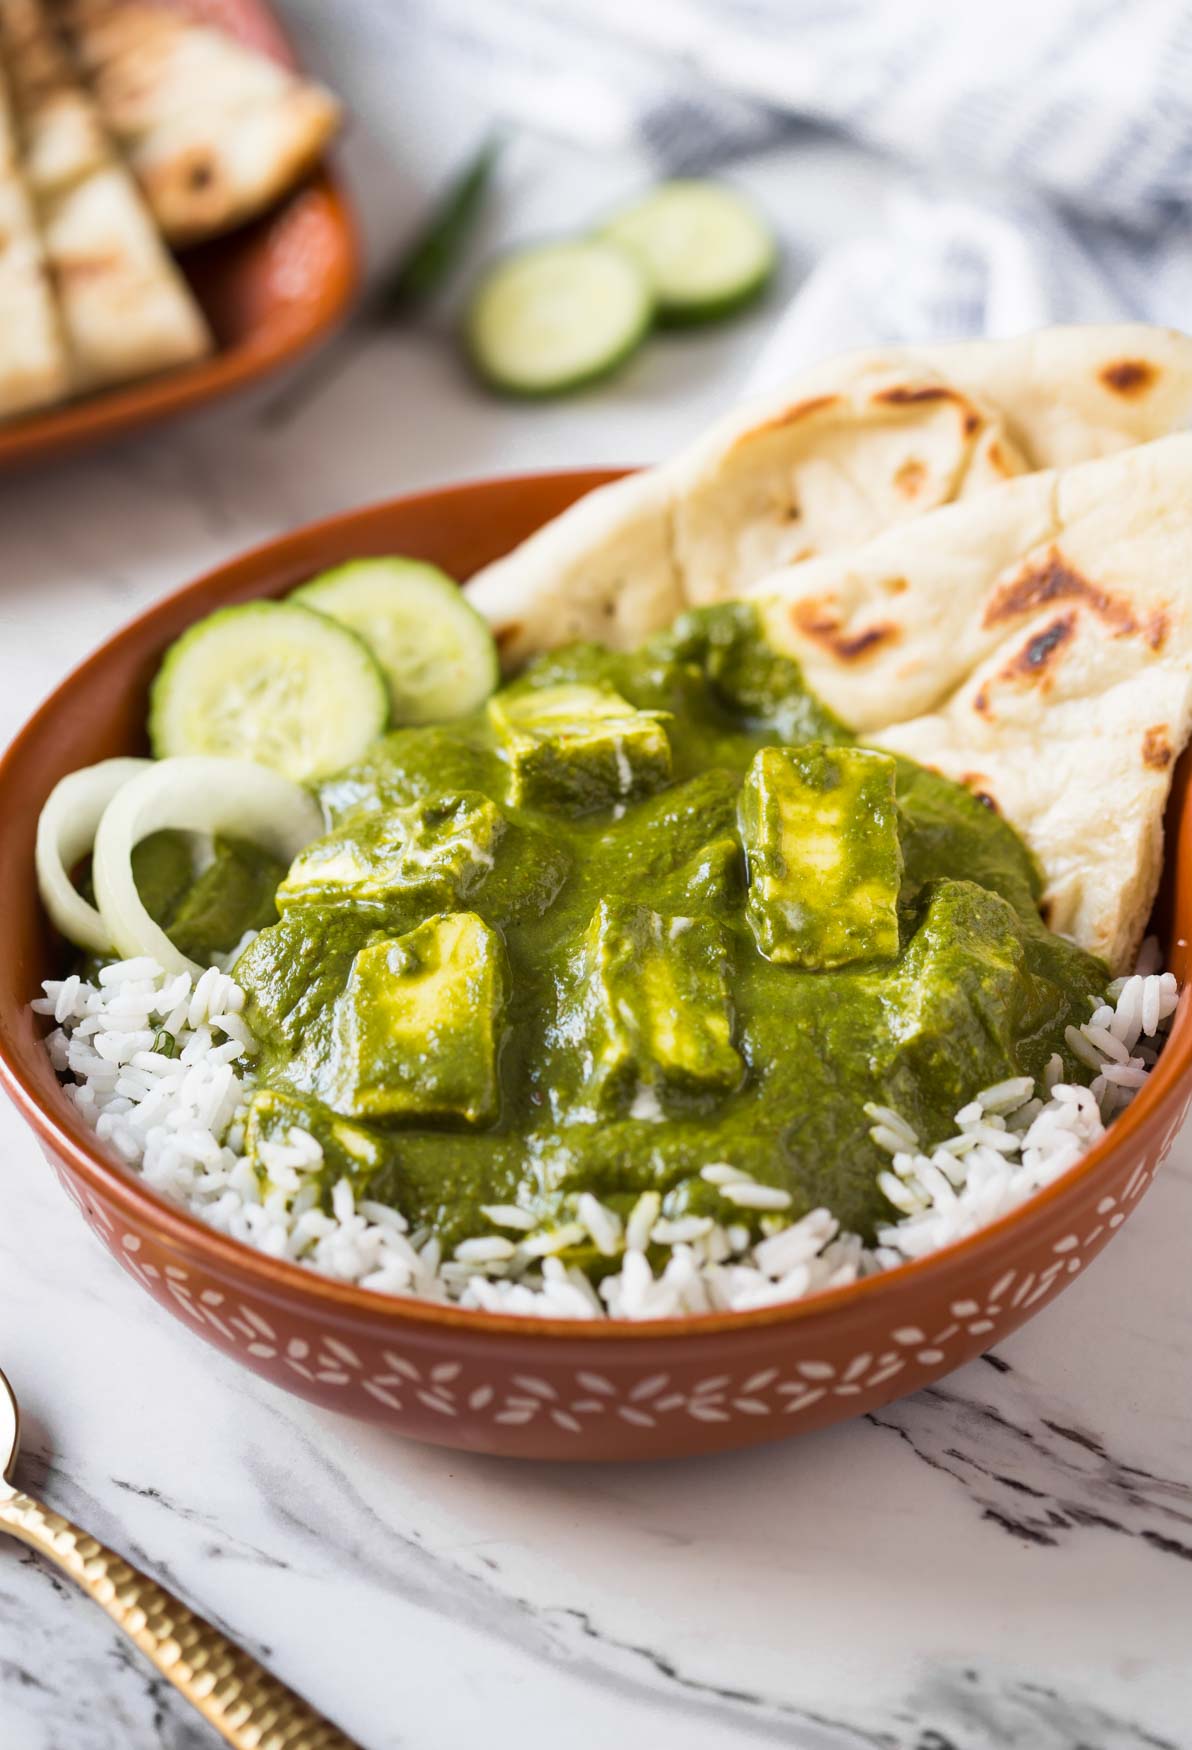 Soft paneer dunked in creamy green spinach curry to prepare authentic Indian palak paneer curry. Healthy, quick and easy recipe for saag paneer curry that you can serve with naan bread or cooked rice. | #watchwhatueat #palakpaneer #spinachrecipe #spinach #vegetarian